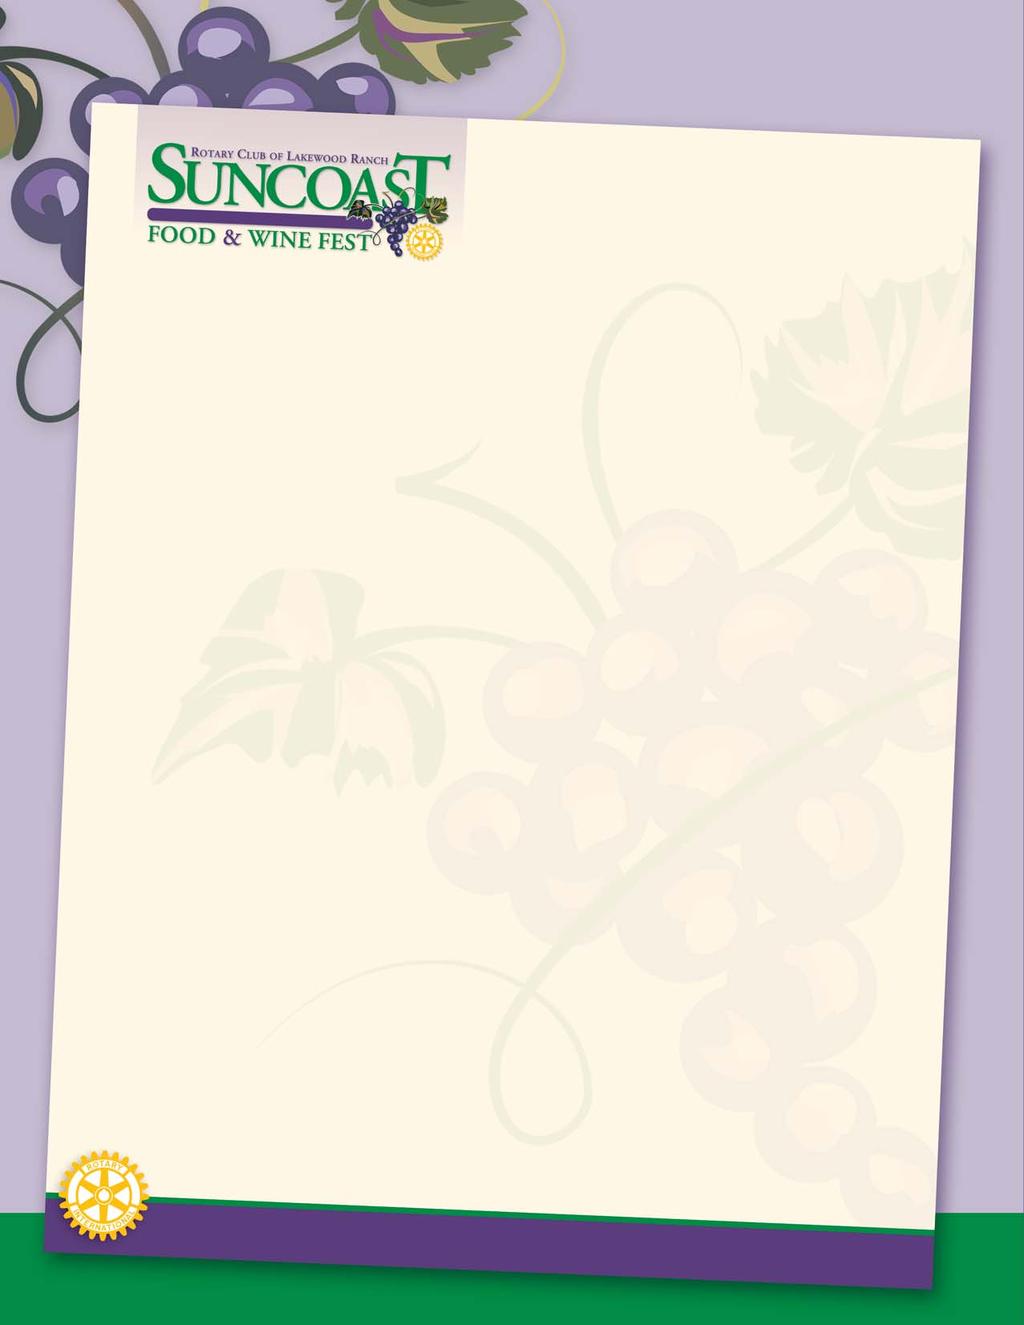 The Rotary Club of Lakewood Ranch Invites You To Participate In The 2015 Suncoast Food & Wine Fest November 11th & 14th The fundraiser this year will include Uncorked an elegant evening and wine